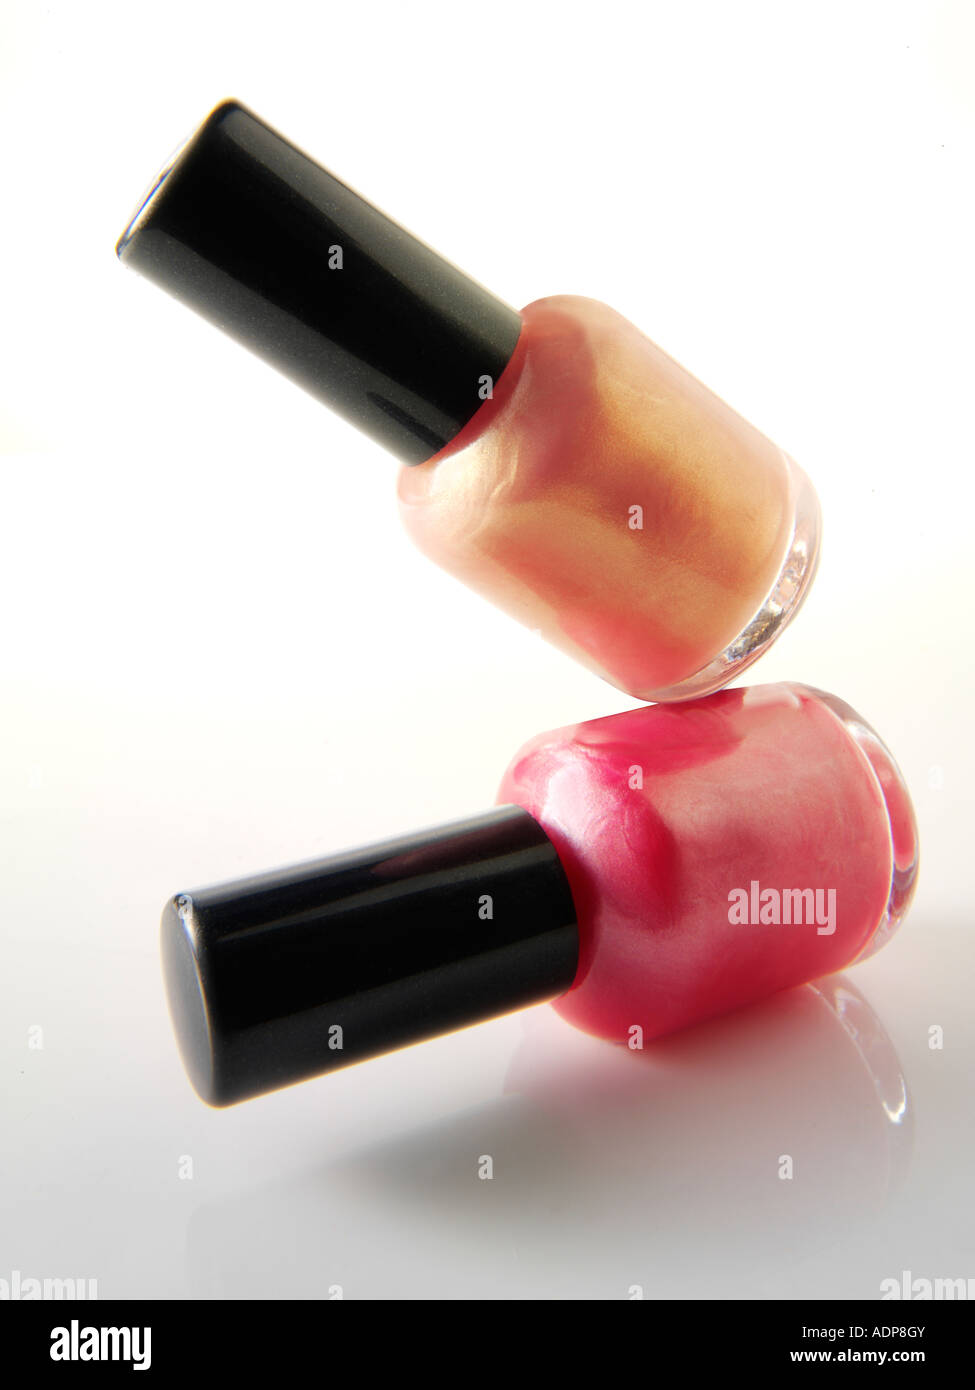 2 Nail Polish bottles balanced on each other in a fun way Stock Photo